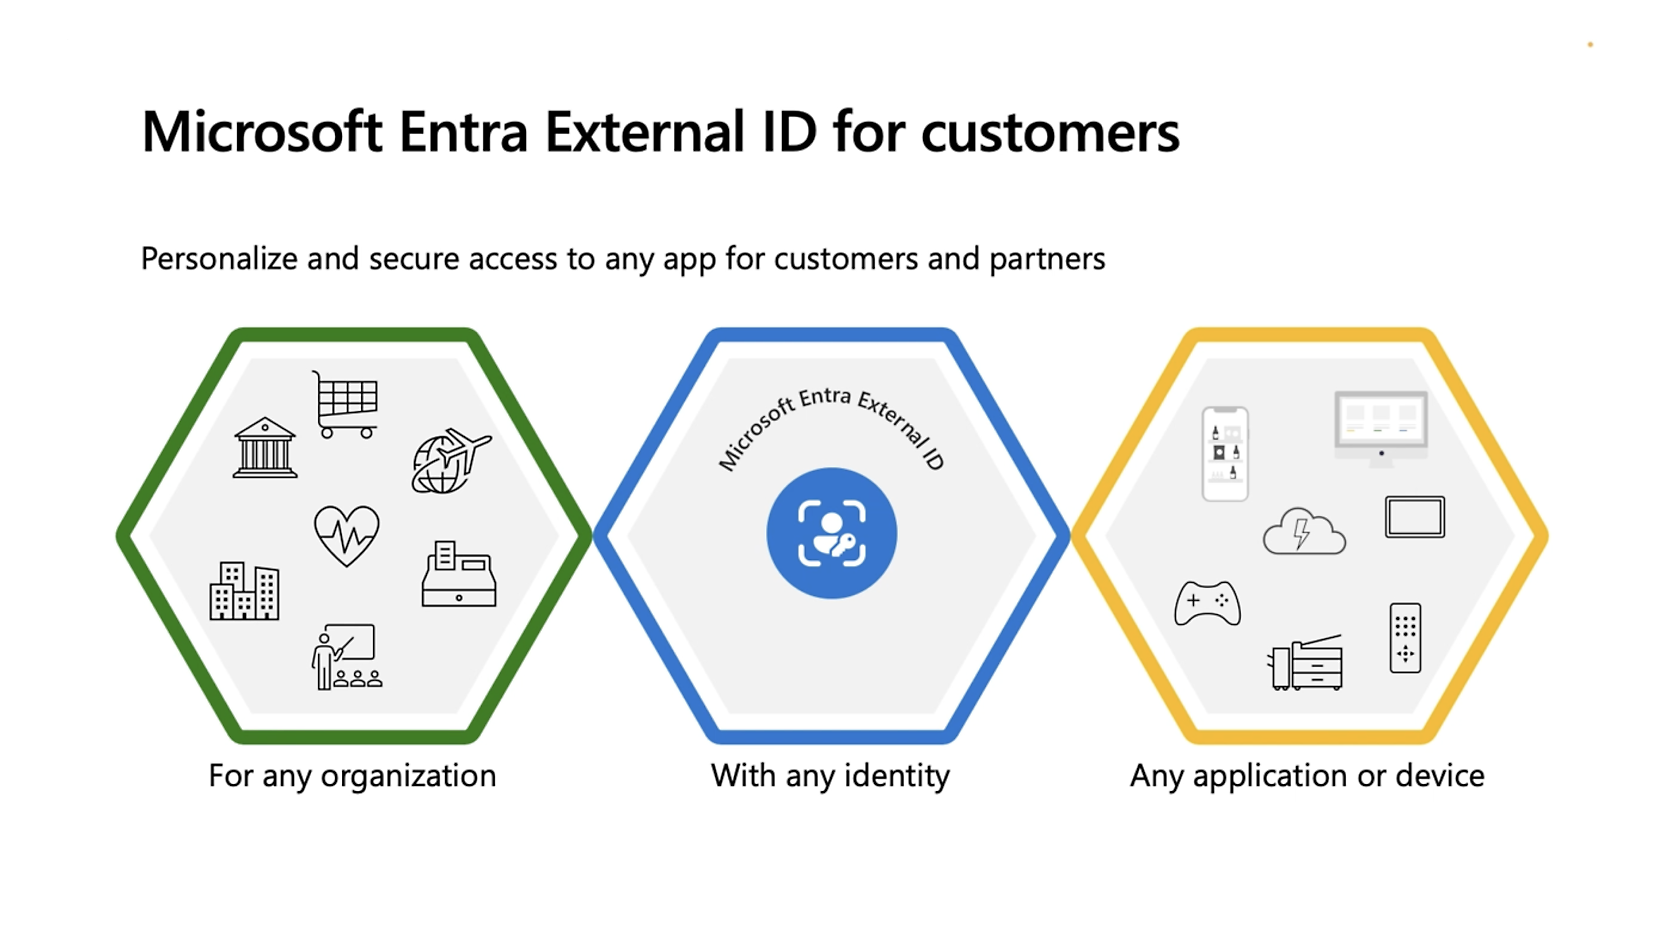 An infographic showing microsoft entra external id features: three hexagons labeled